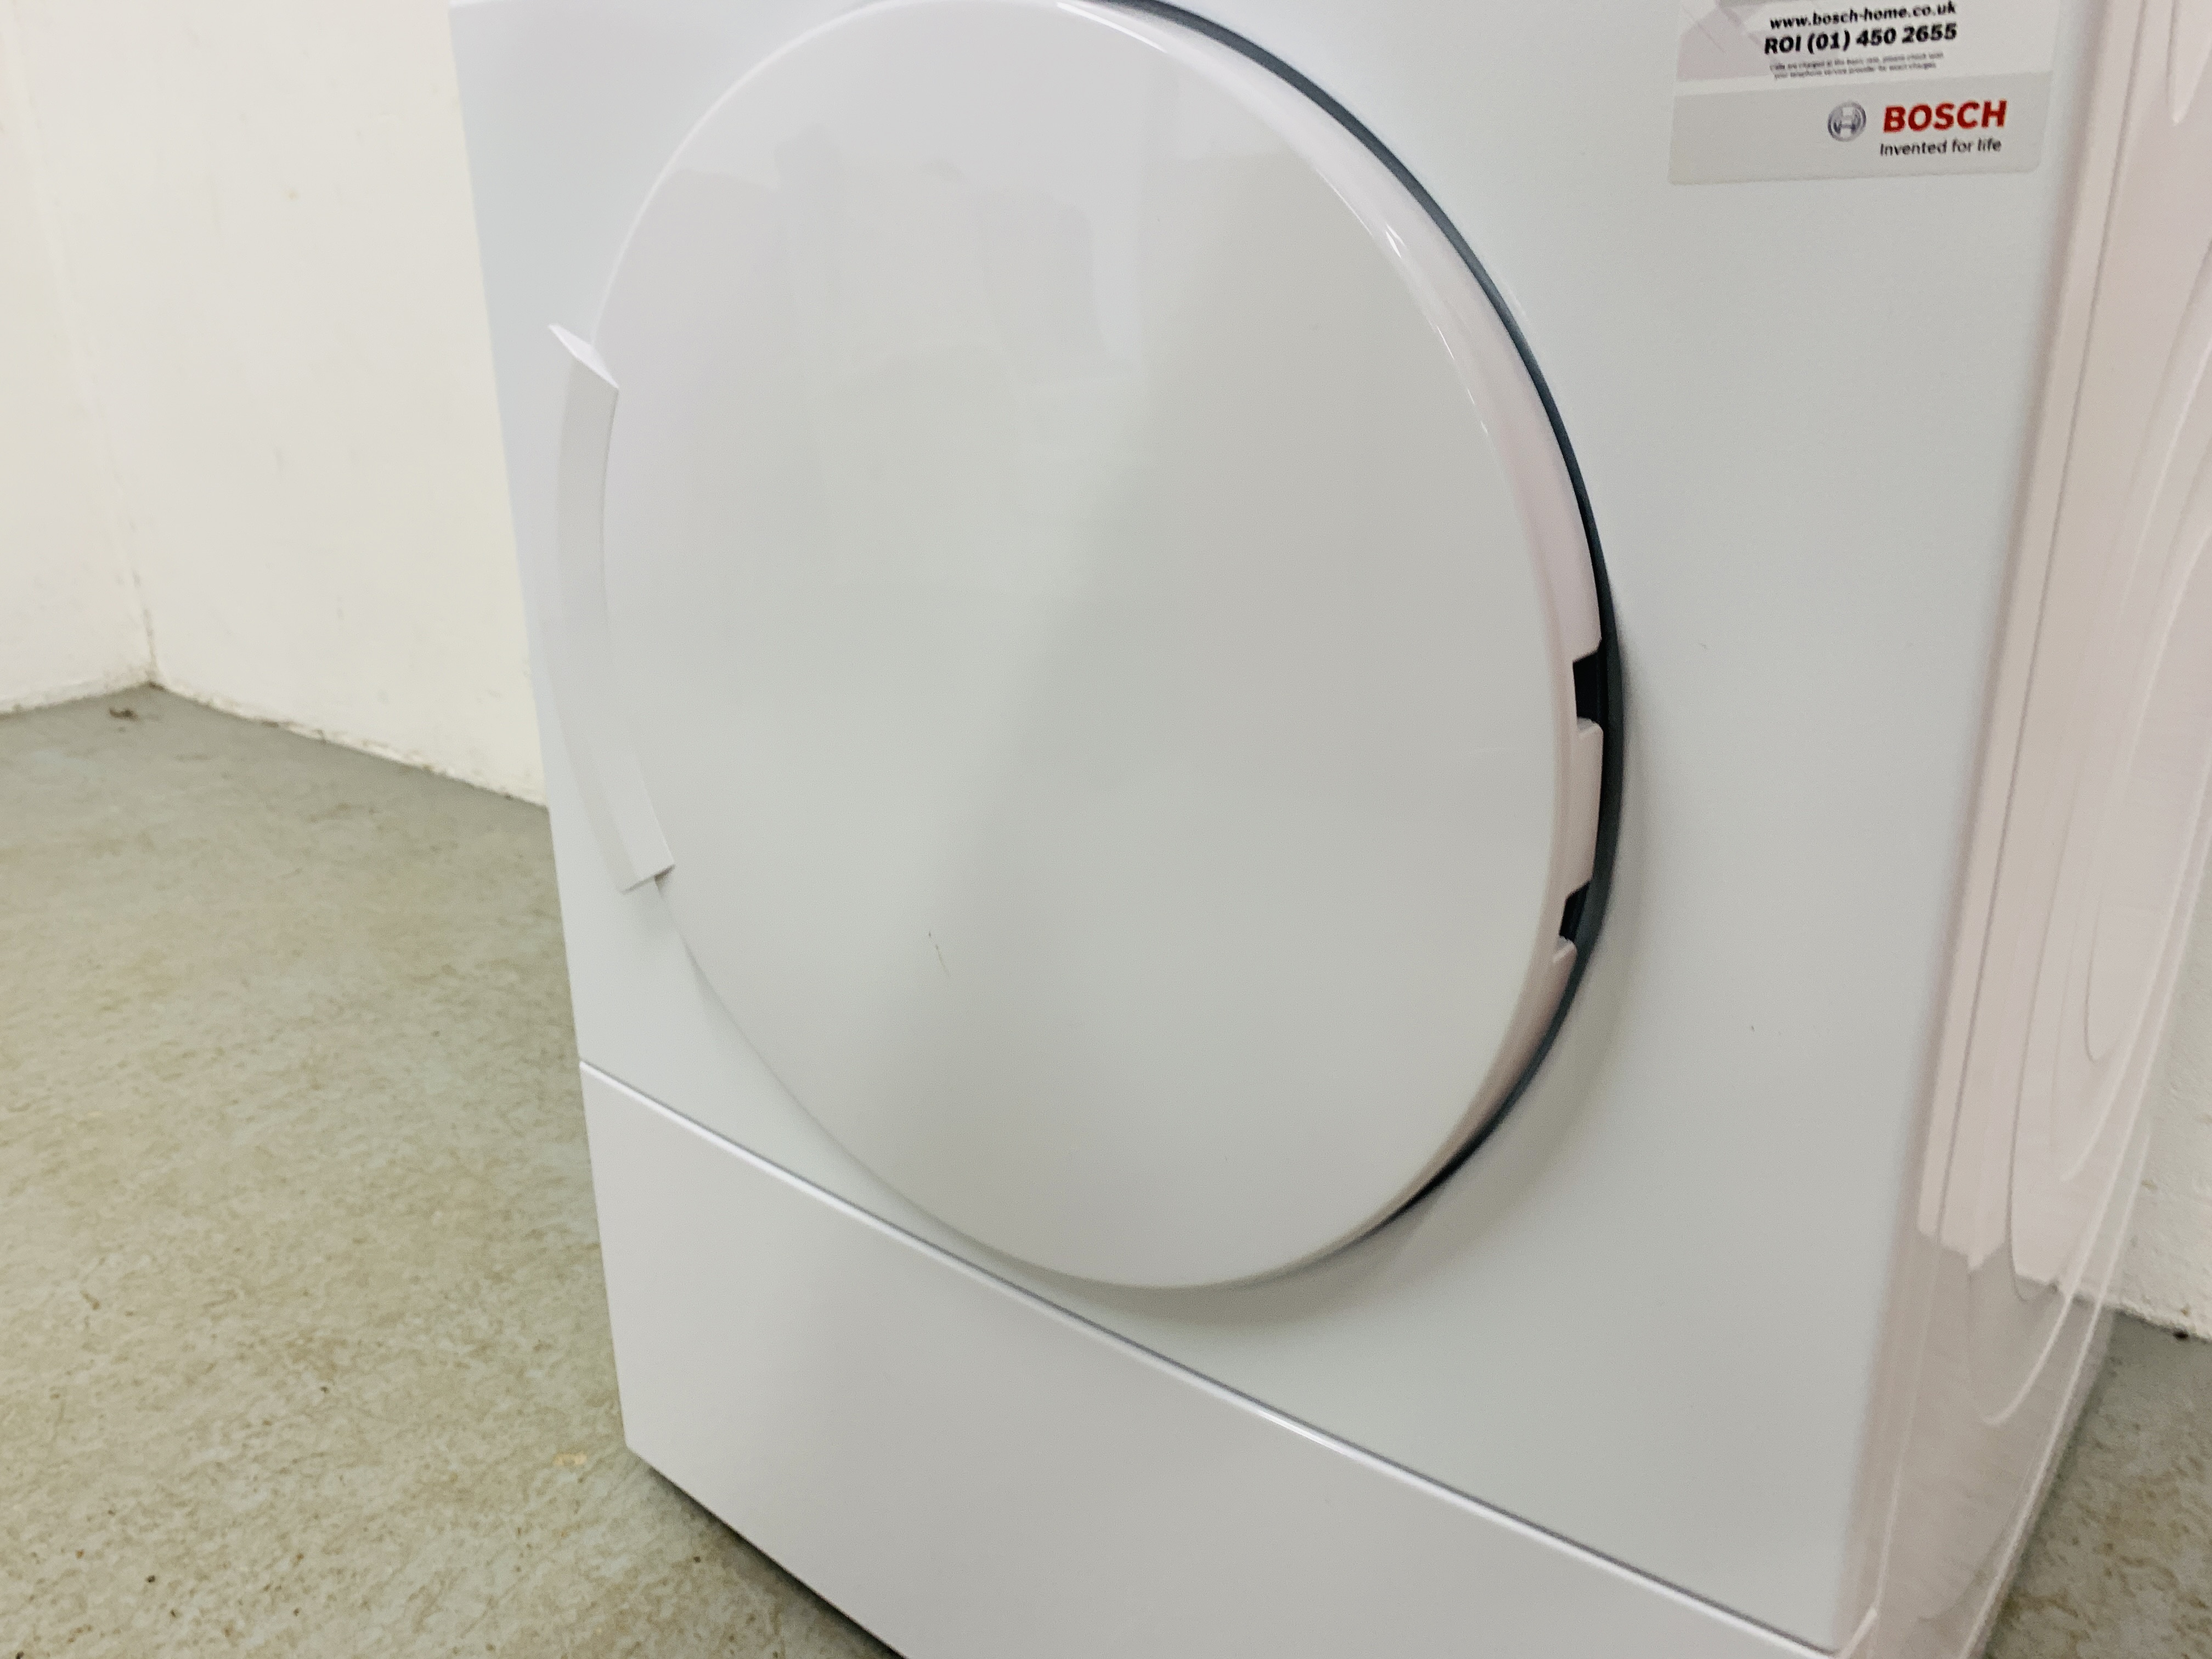 A BOSCH SERIES 4 TUMBLE DRYER - SOLD AS SEEN - Image 3 of 6